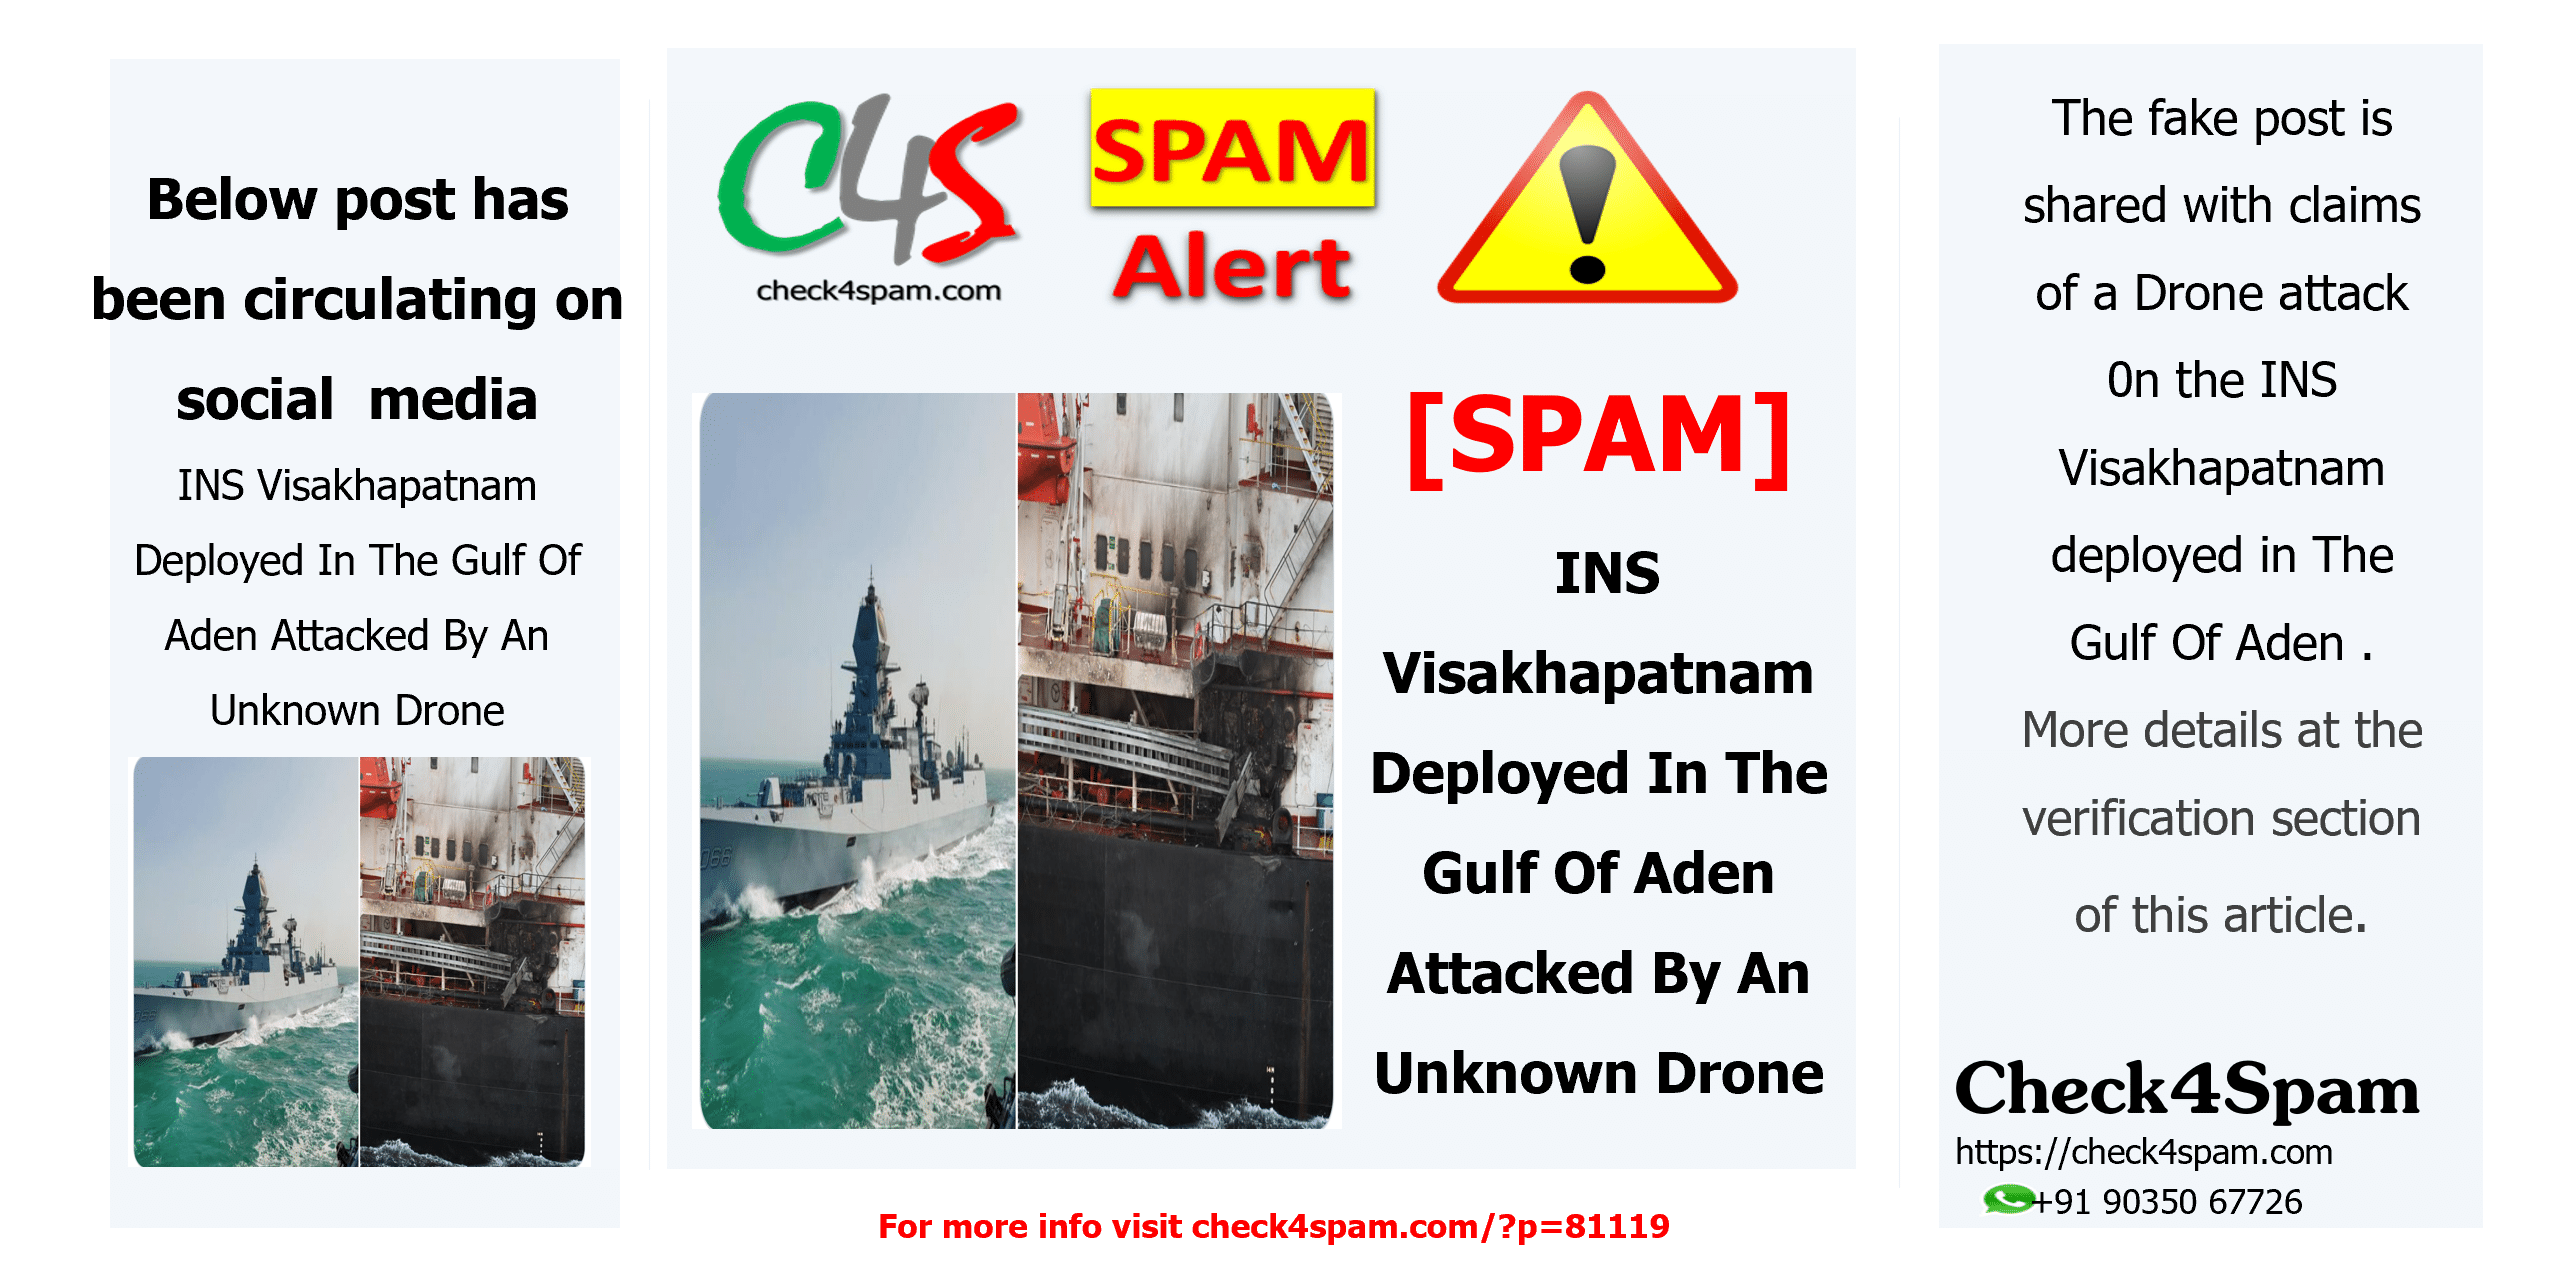 INS Visakhapatnam Deployed In The Gulf Of Aden Attacked By An Unknown Drone